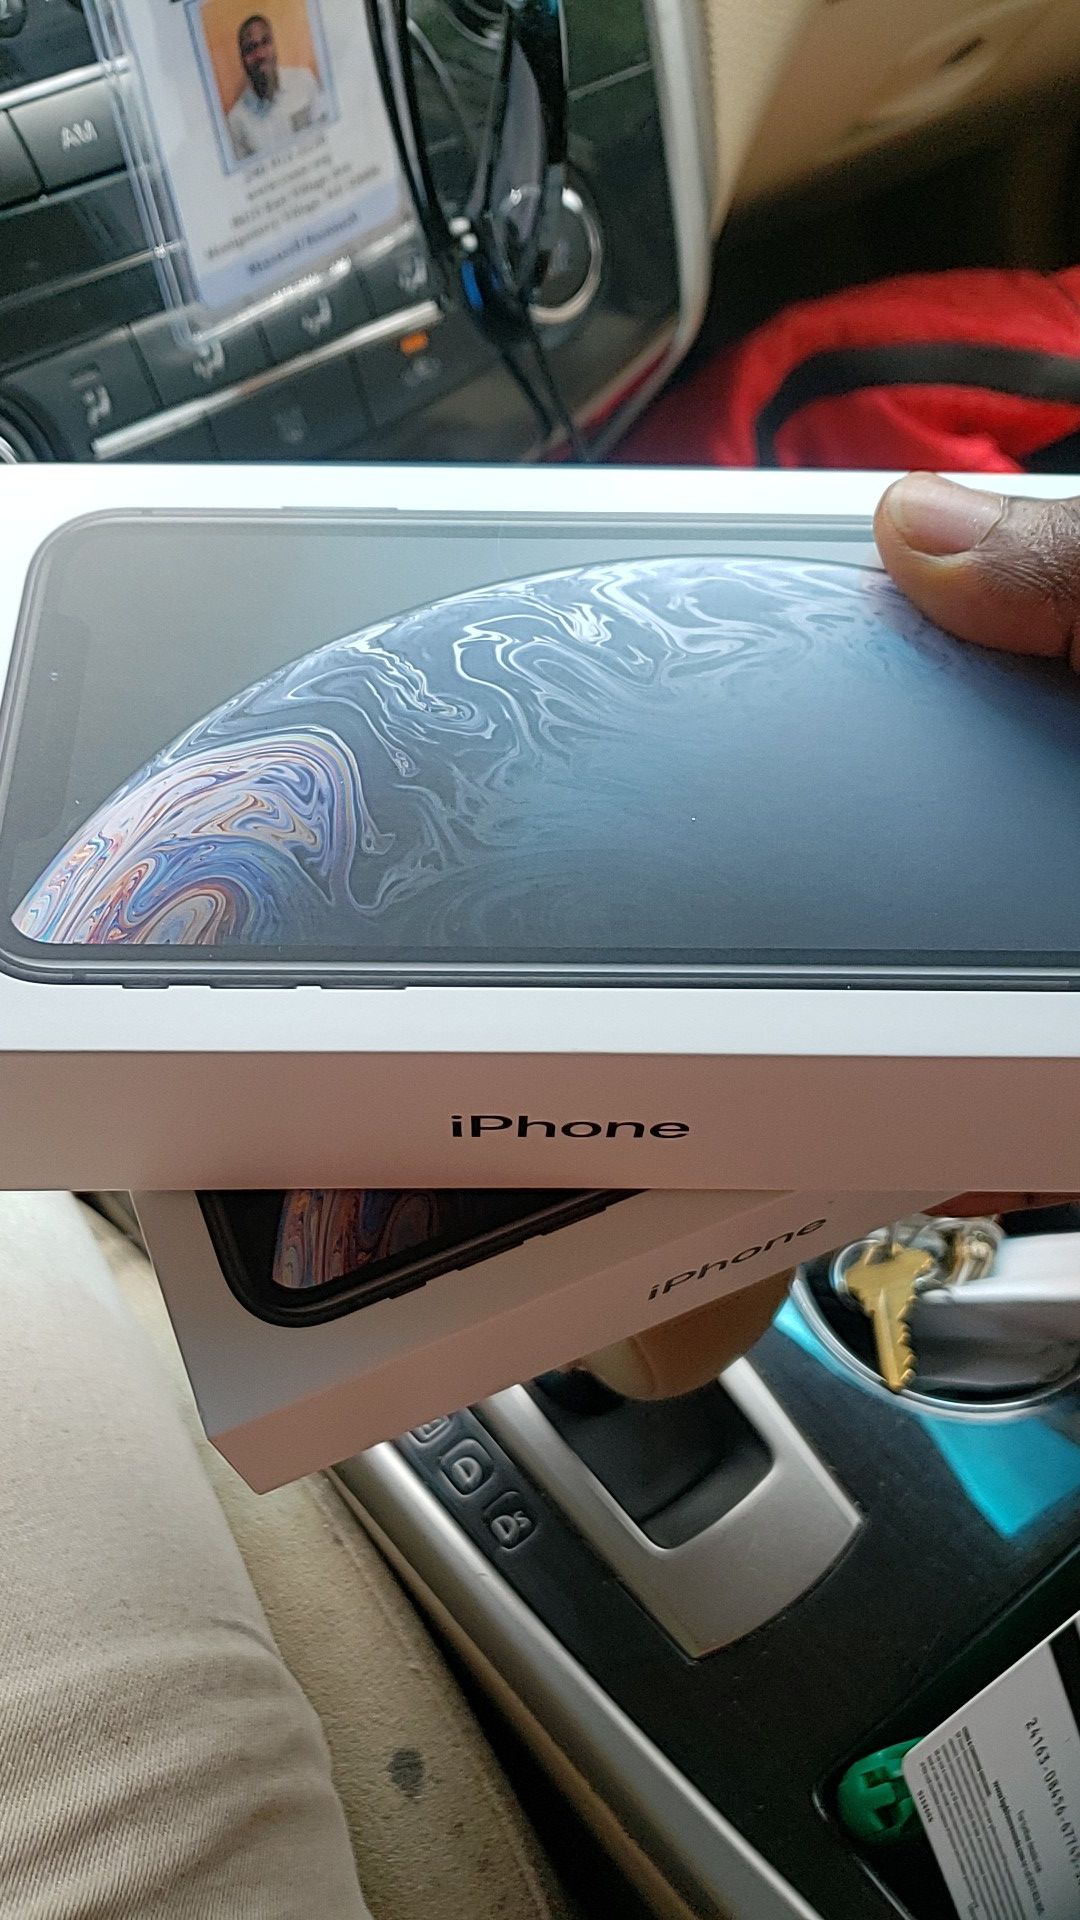 Brand new iphone xr for at&t,h20 and cricket